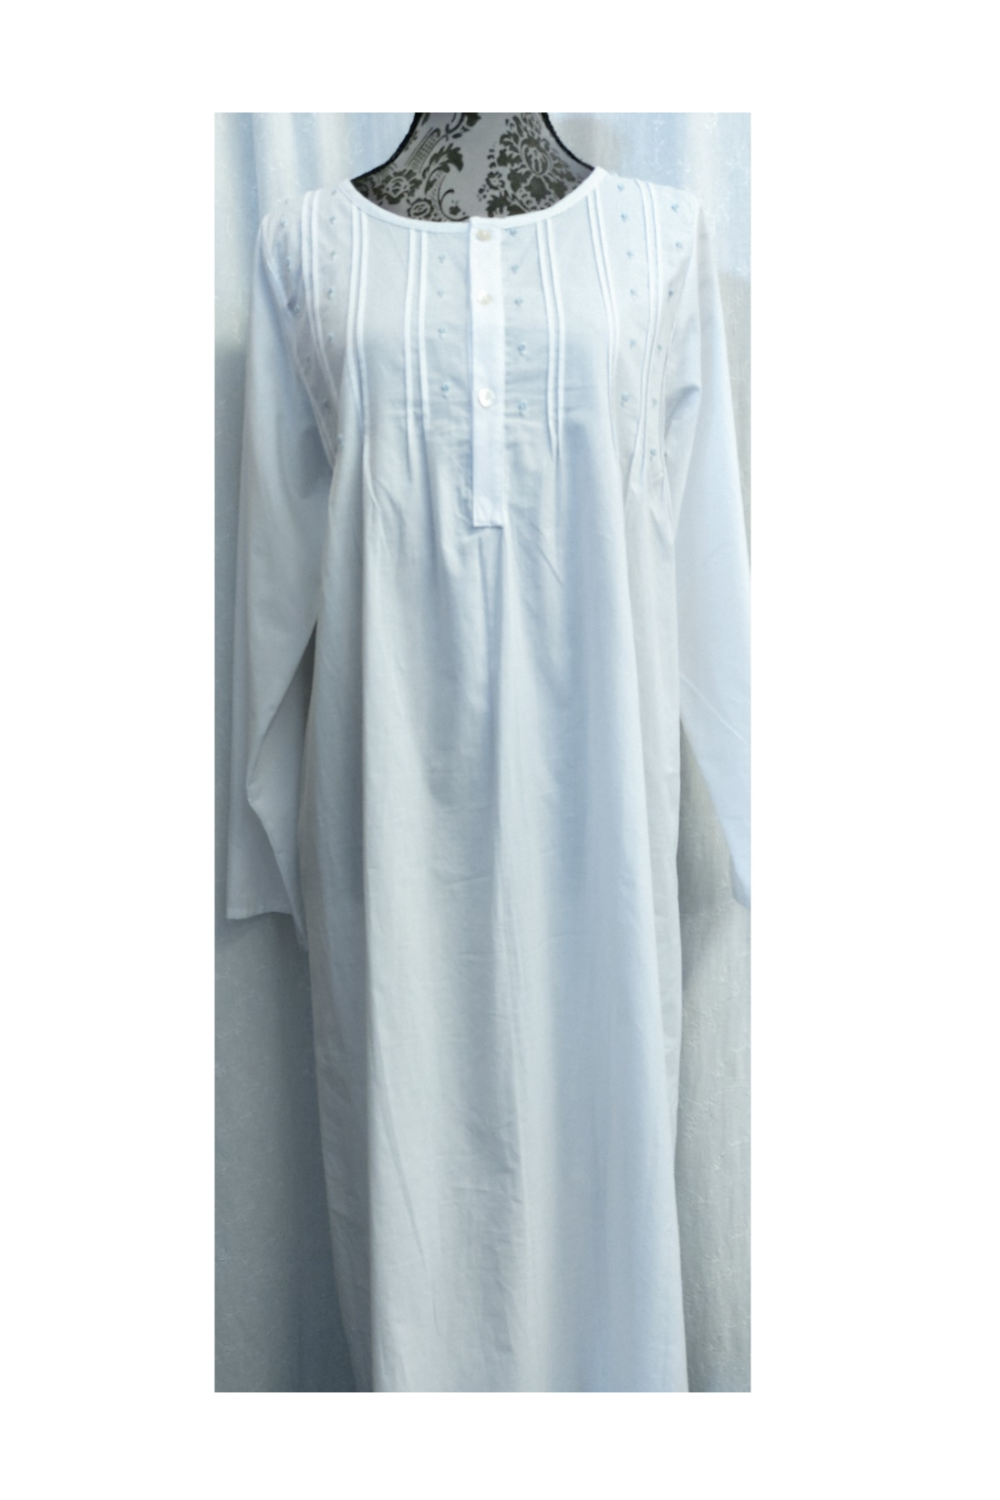 Long Sleeve Cotton Pintuck Nightdress - Blue Embroidery